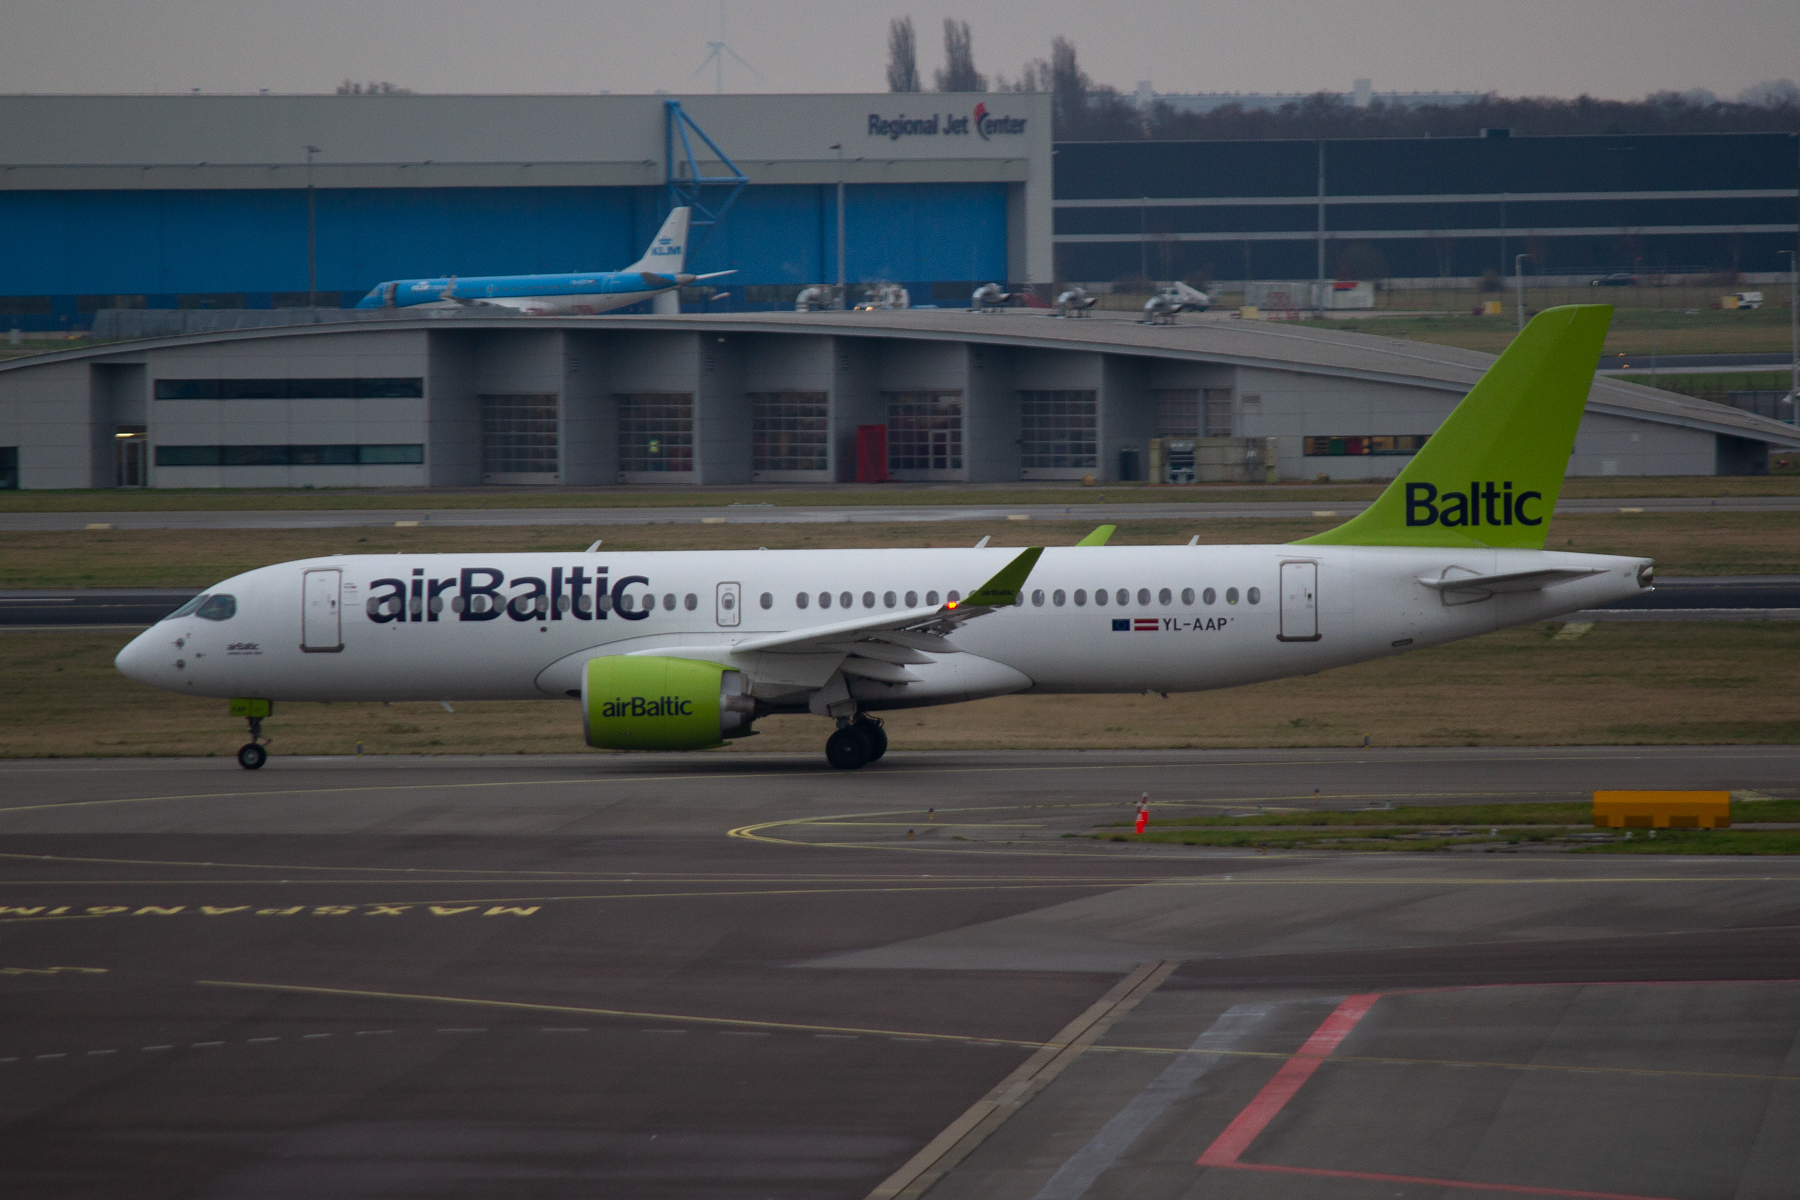 Air Baltic Airbus A220-300 YL-AAP at Schiphol